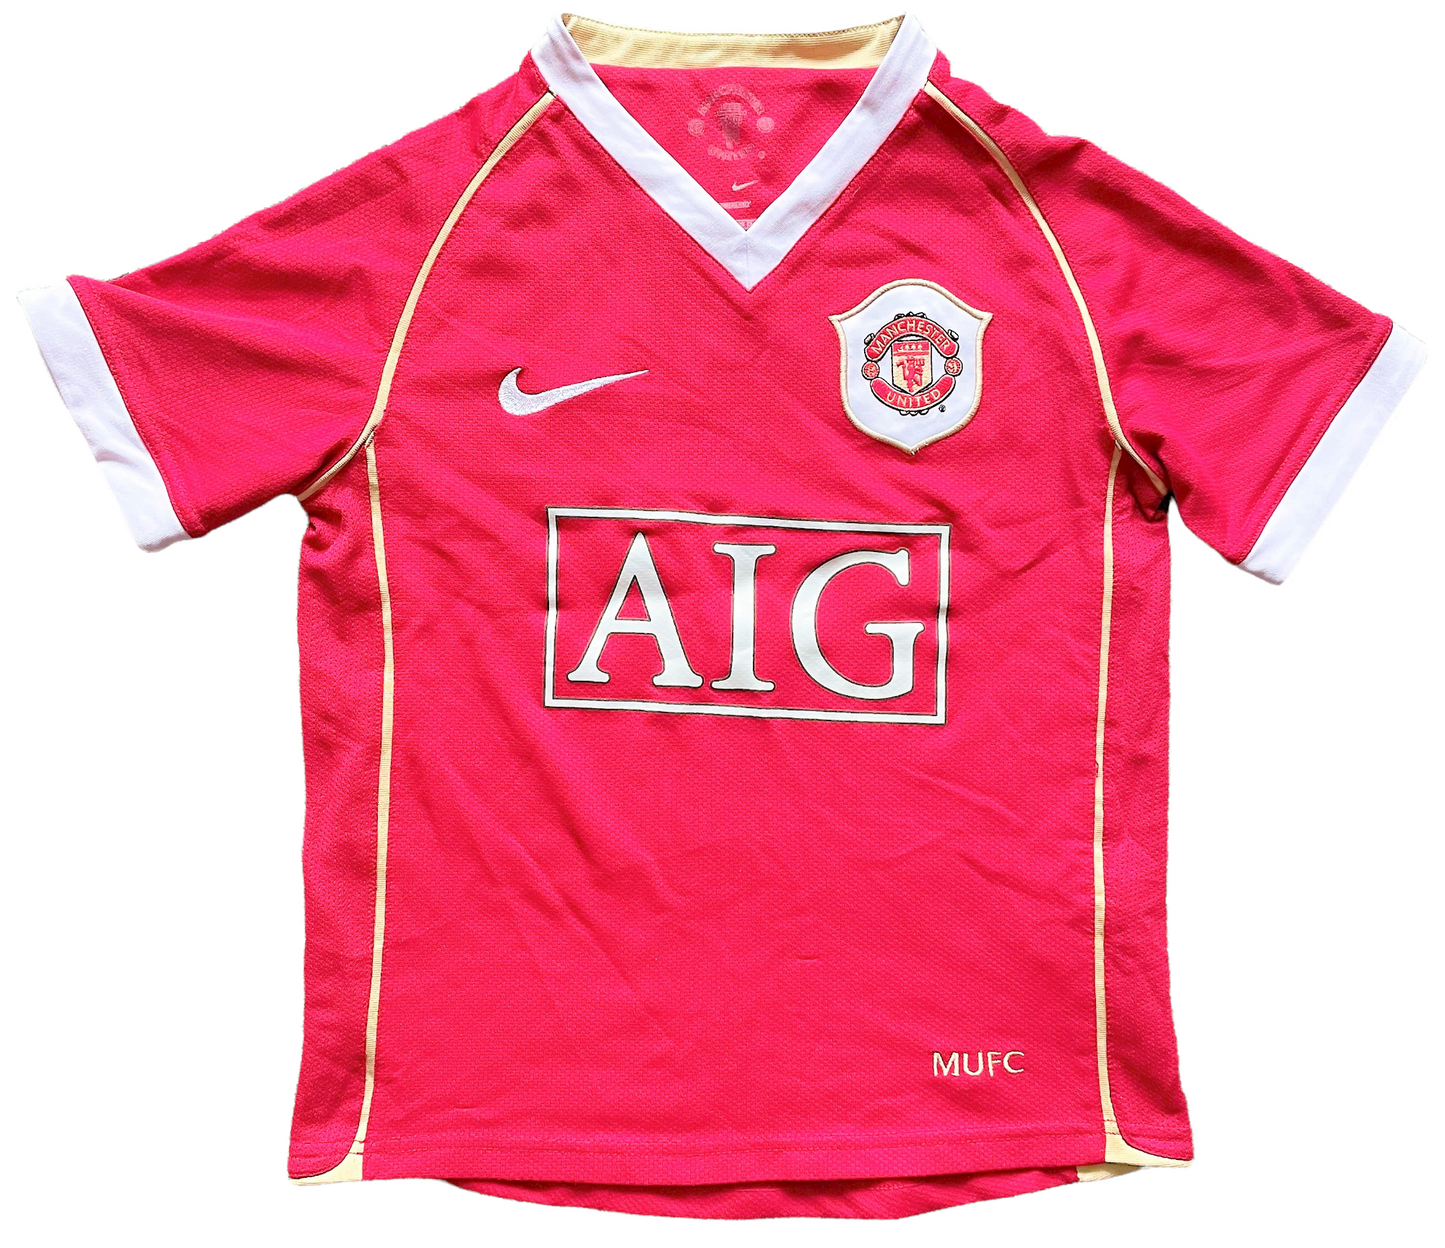 Man United Home Shirt 2006 ROONEY 8 (very good) Childs 6-8yrs. Height 15 inches